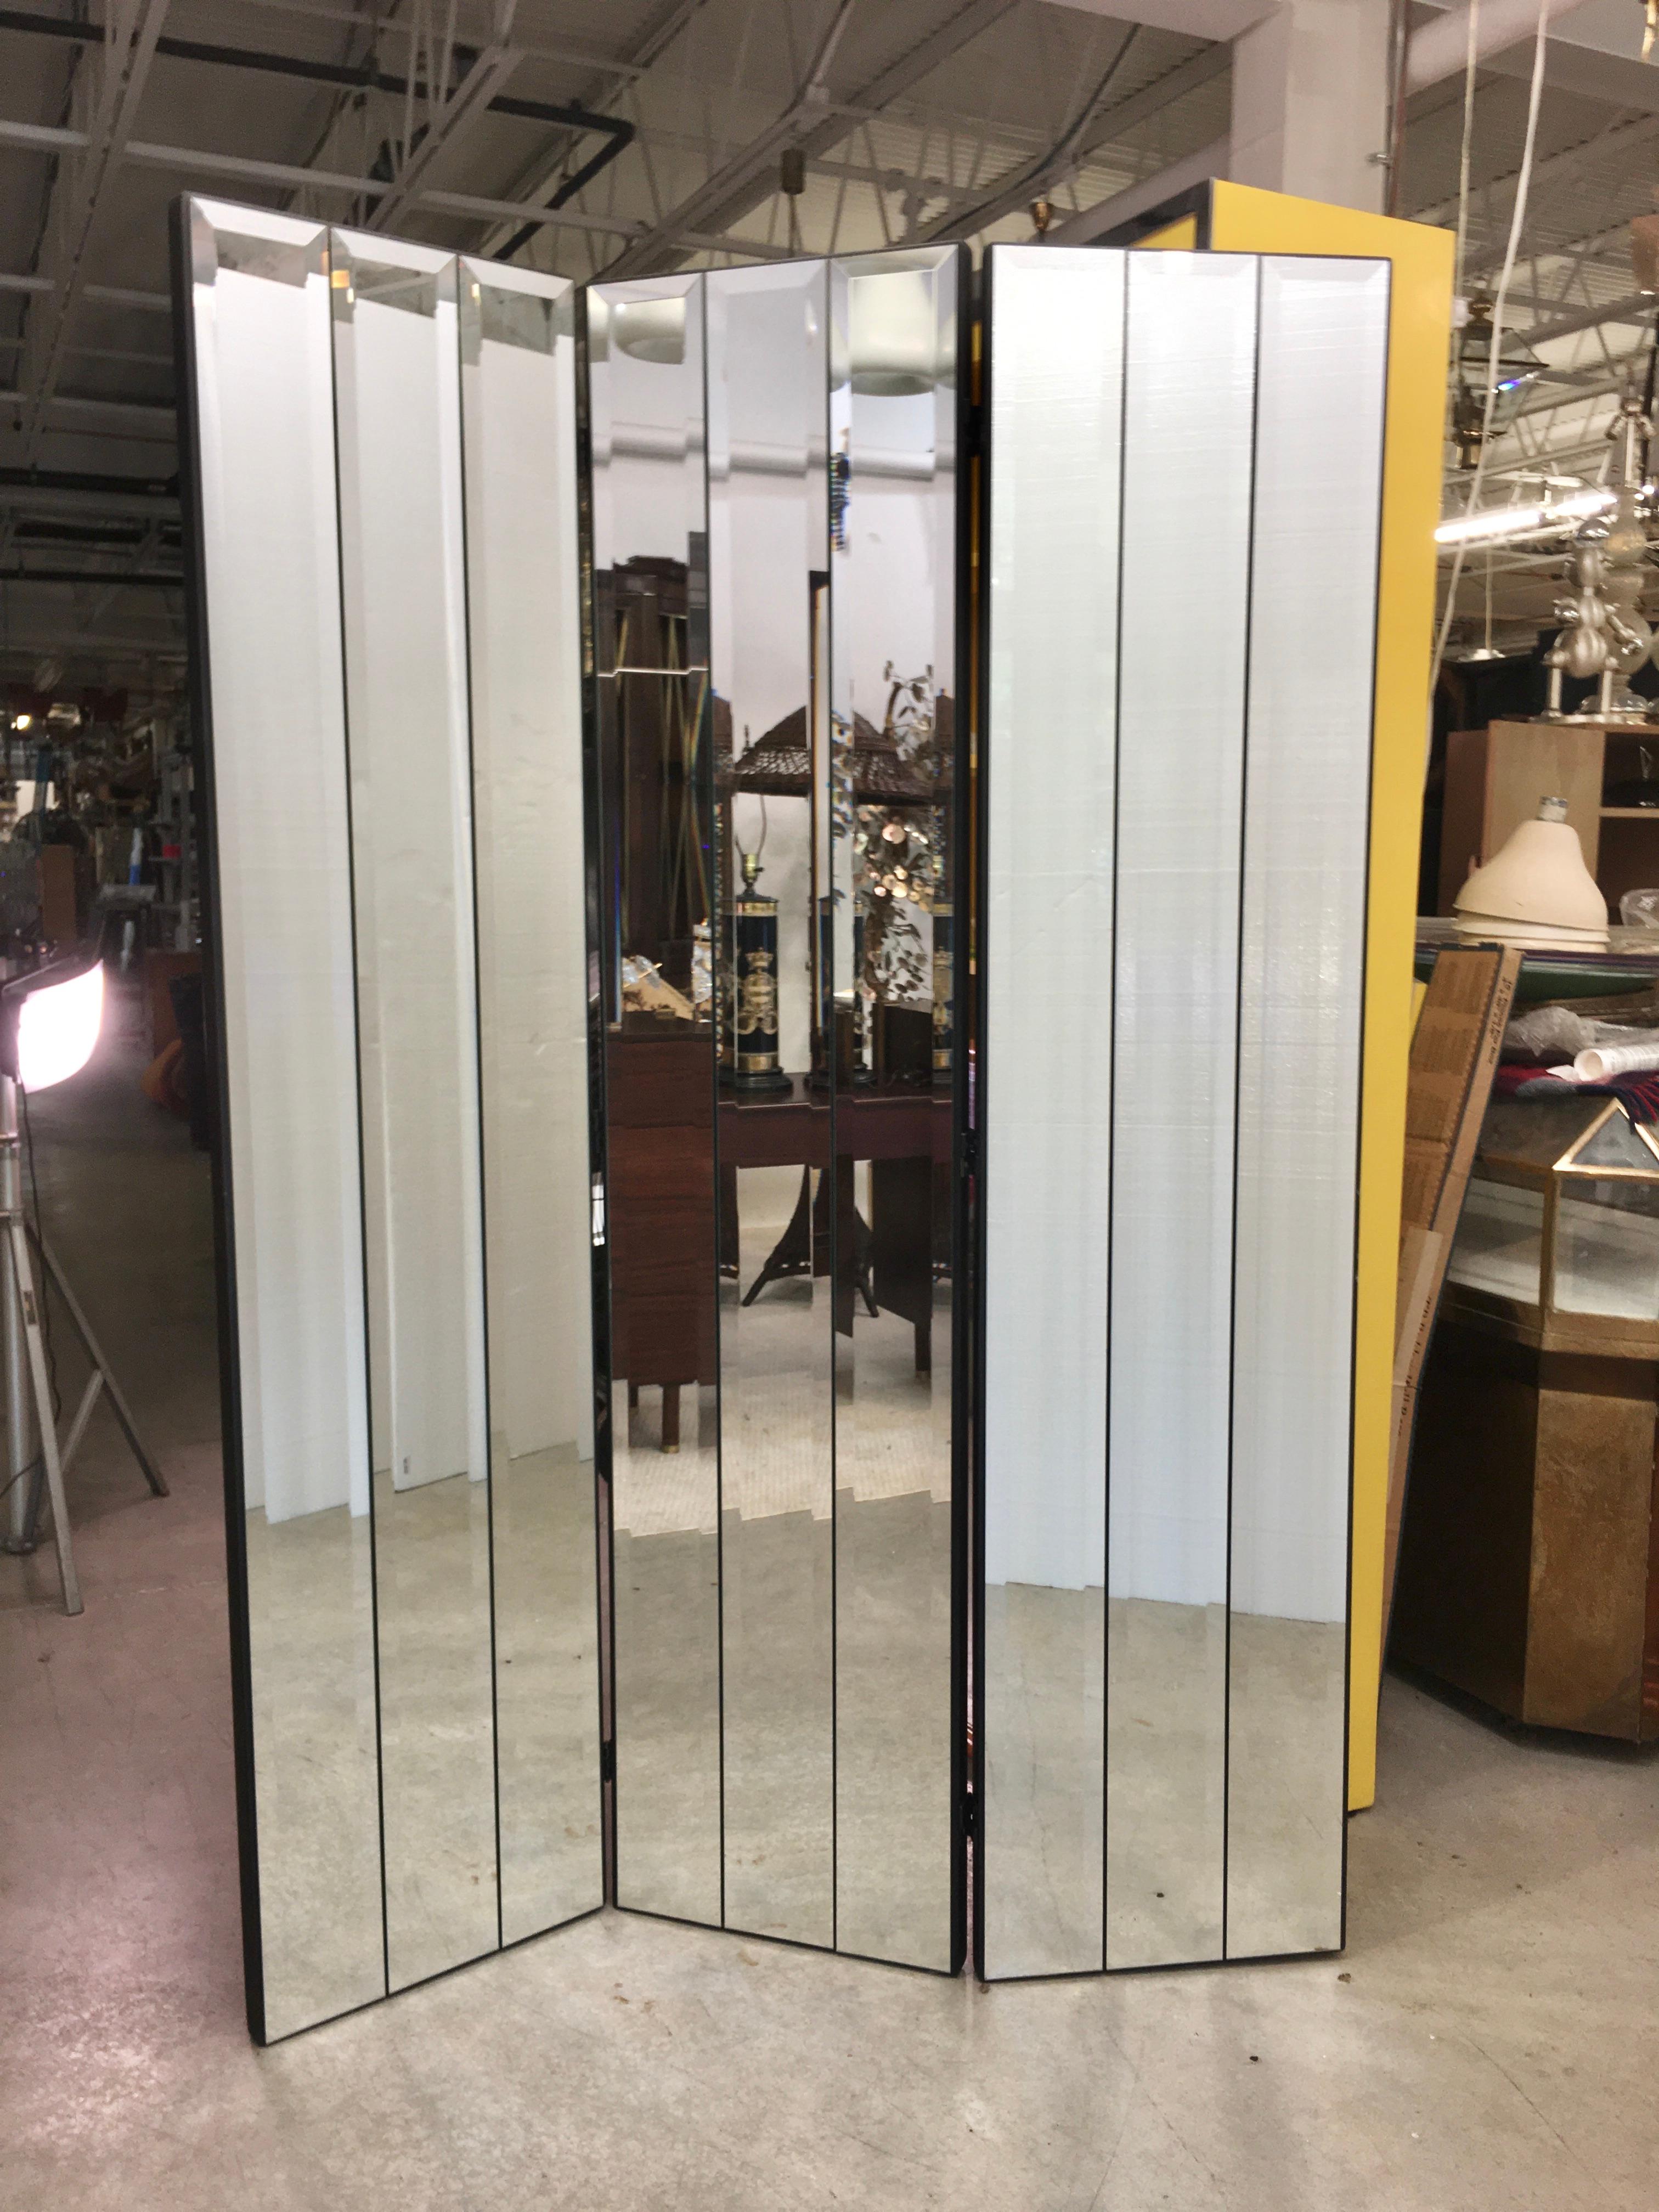 Tall and solid three-panel hinged folding paravent by Ello furniture, circa 1975. Each 18 inch wide panel is applied with three elongated beveled mirrored glass. The panels are ebonized solid oak. Last two photos demonstrate the range of